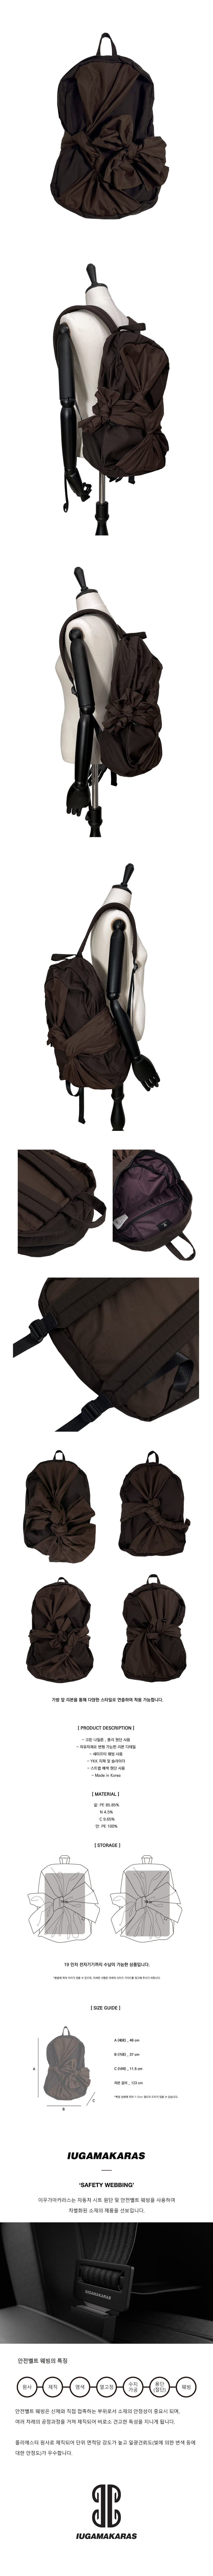 Knotted Backpack (brown)